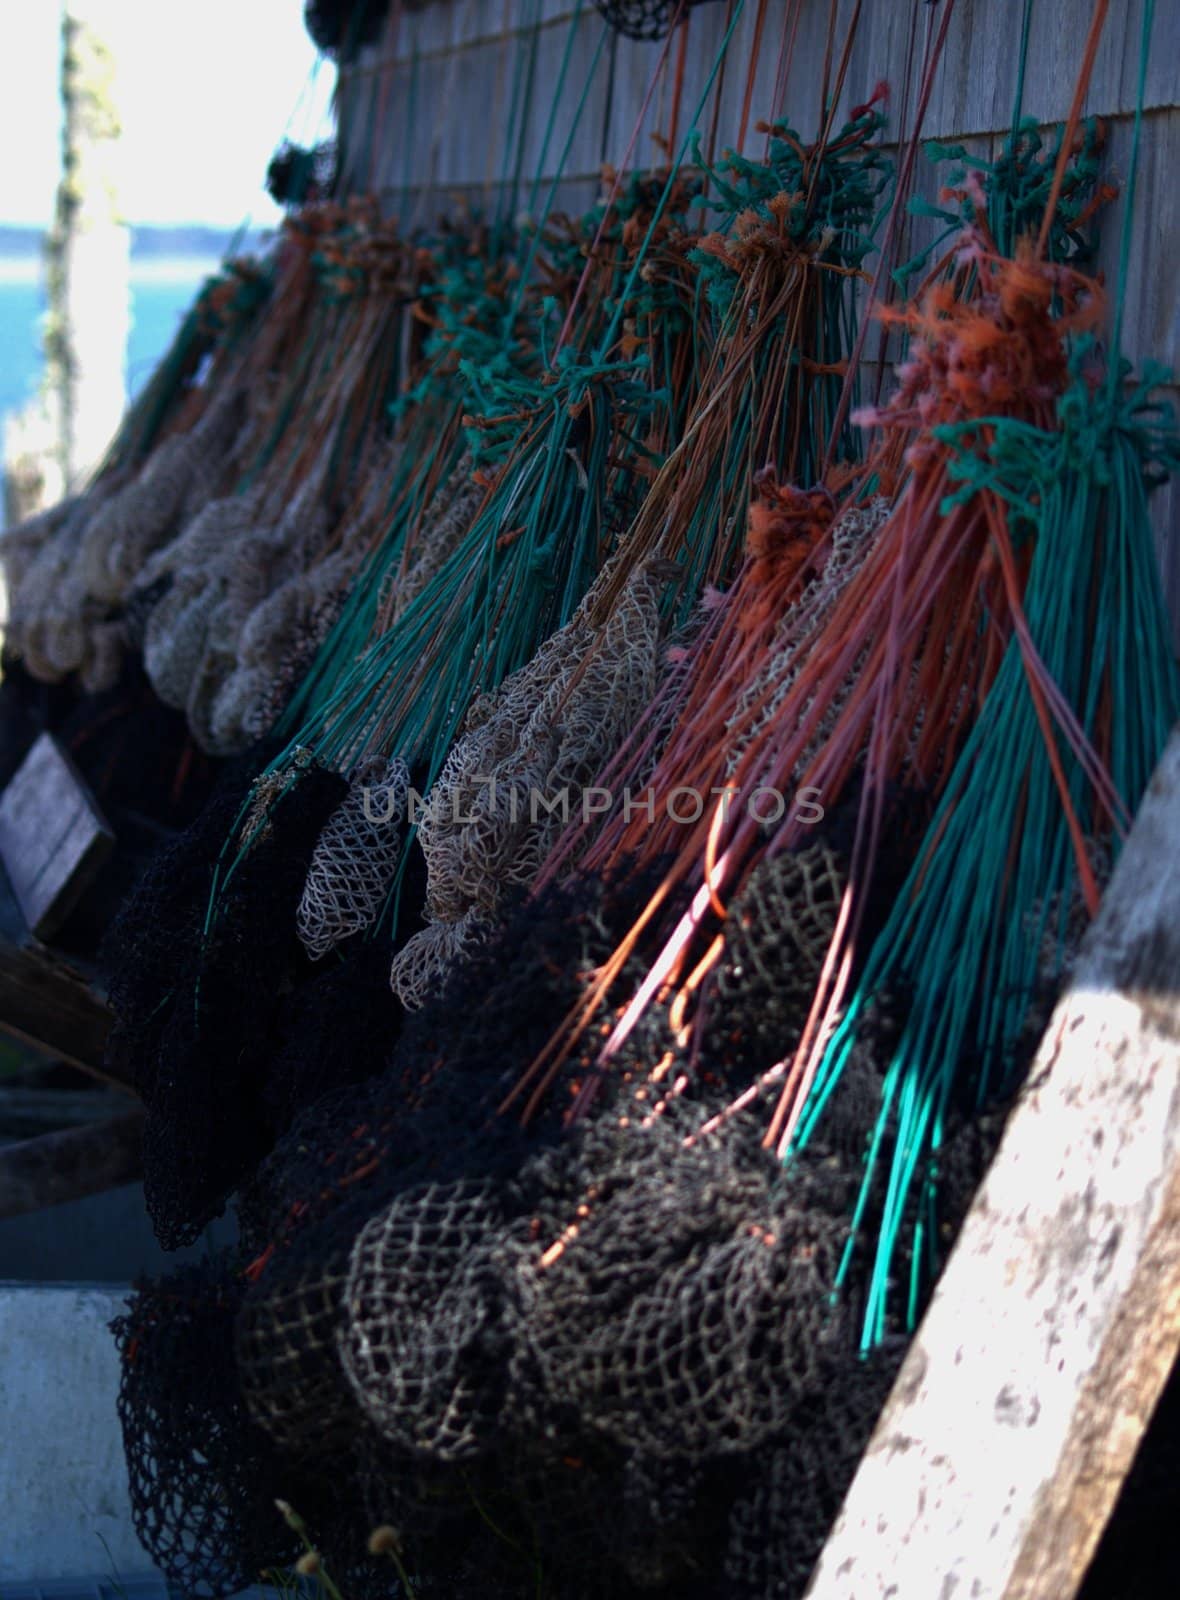 Fisherman's lobster bait pockets hung and ready for the season